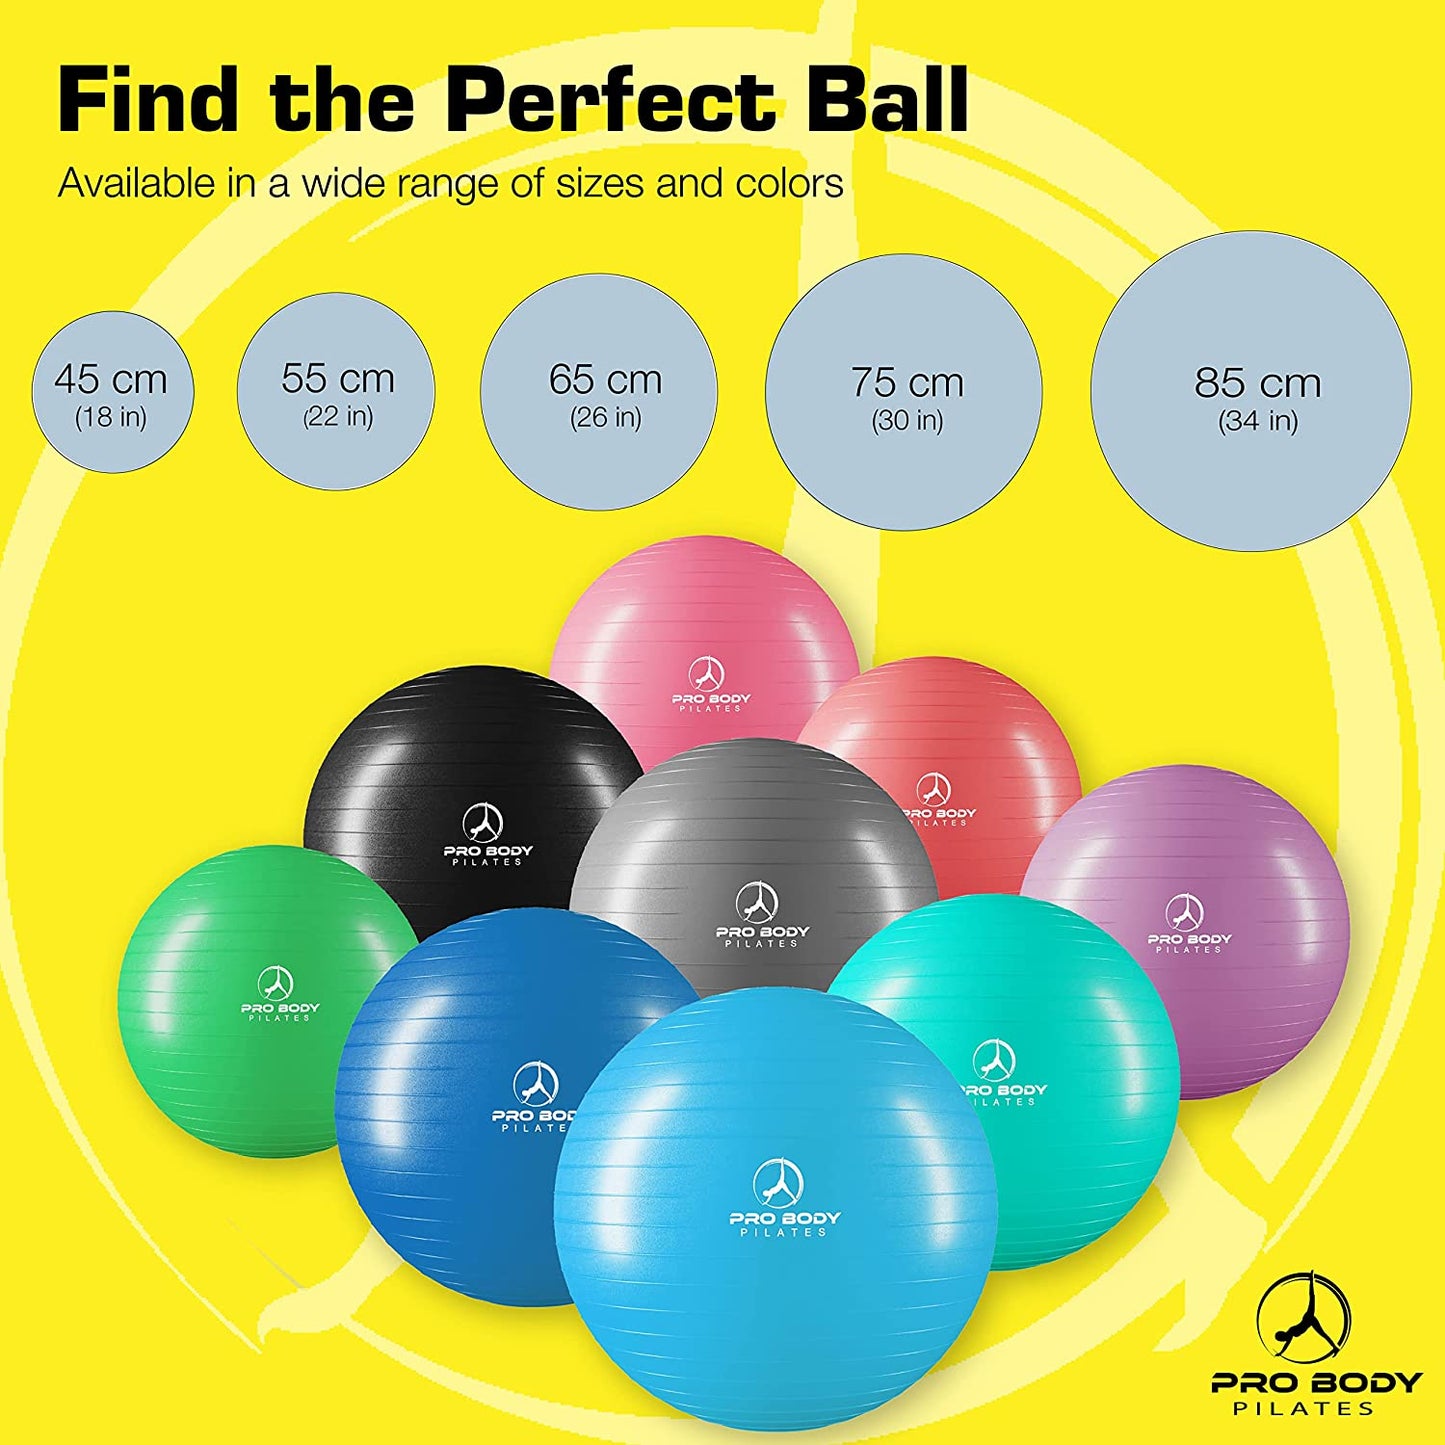 Yoga Ball for Pregnancy, Fitness, Balance, Workout at Home, Office and Physical Therapy (Teal)